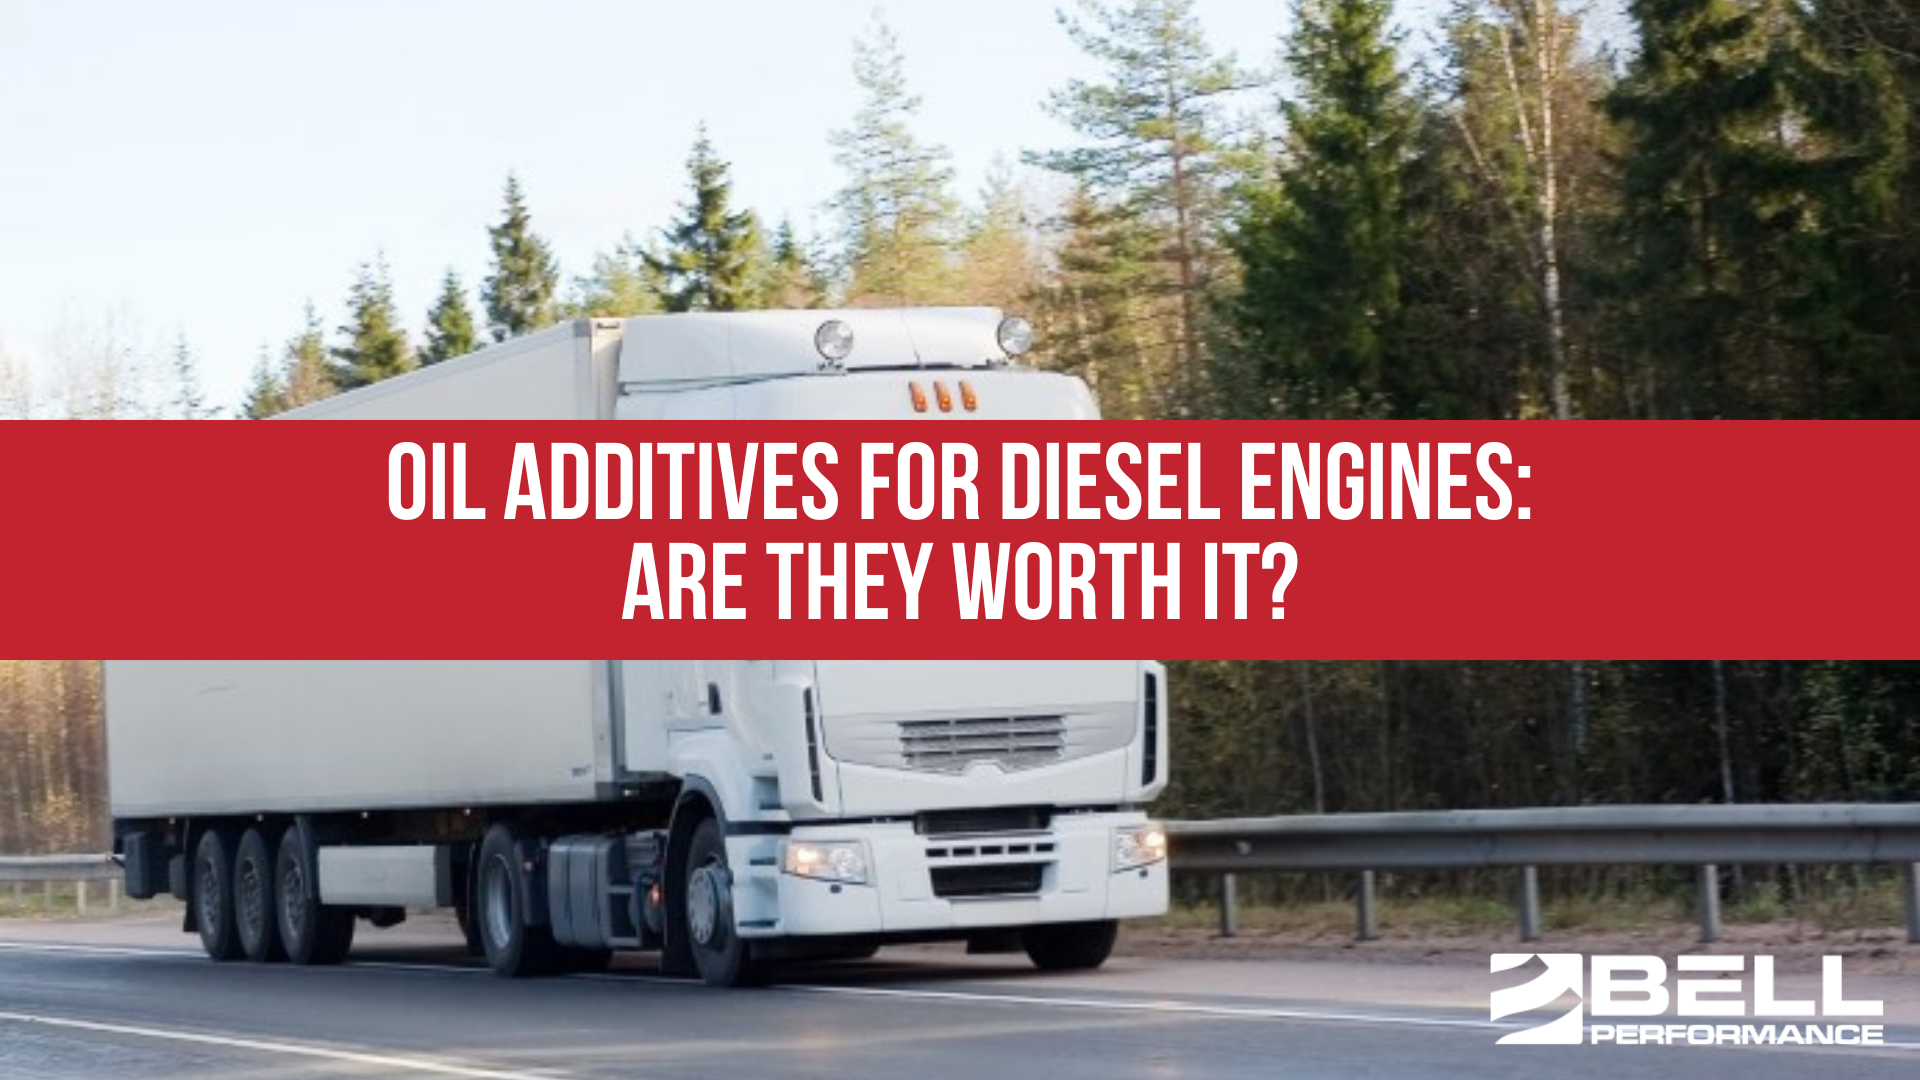 Oil Additives For Diesel Engines - Are They Worth It?